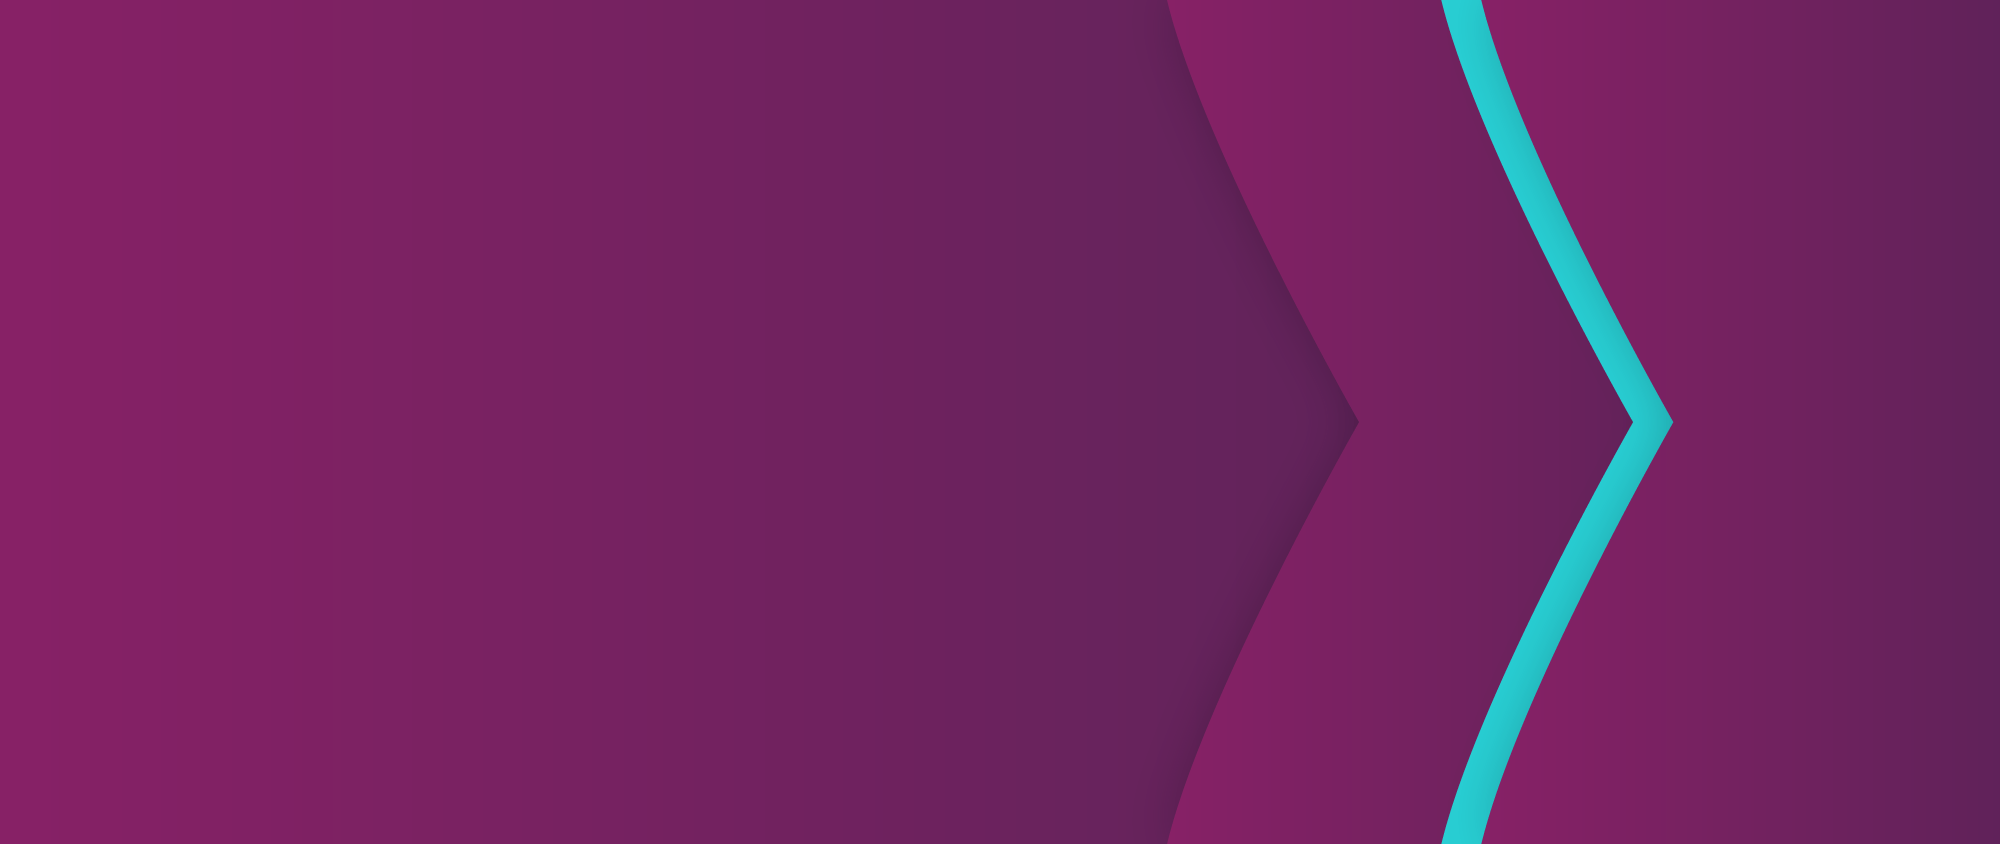 Skrill brand purple and teal arrows background